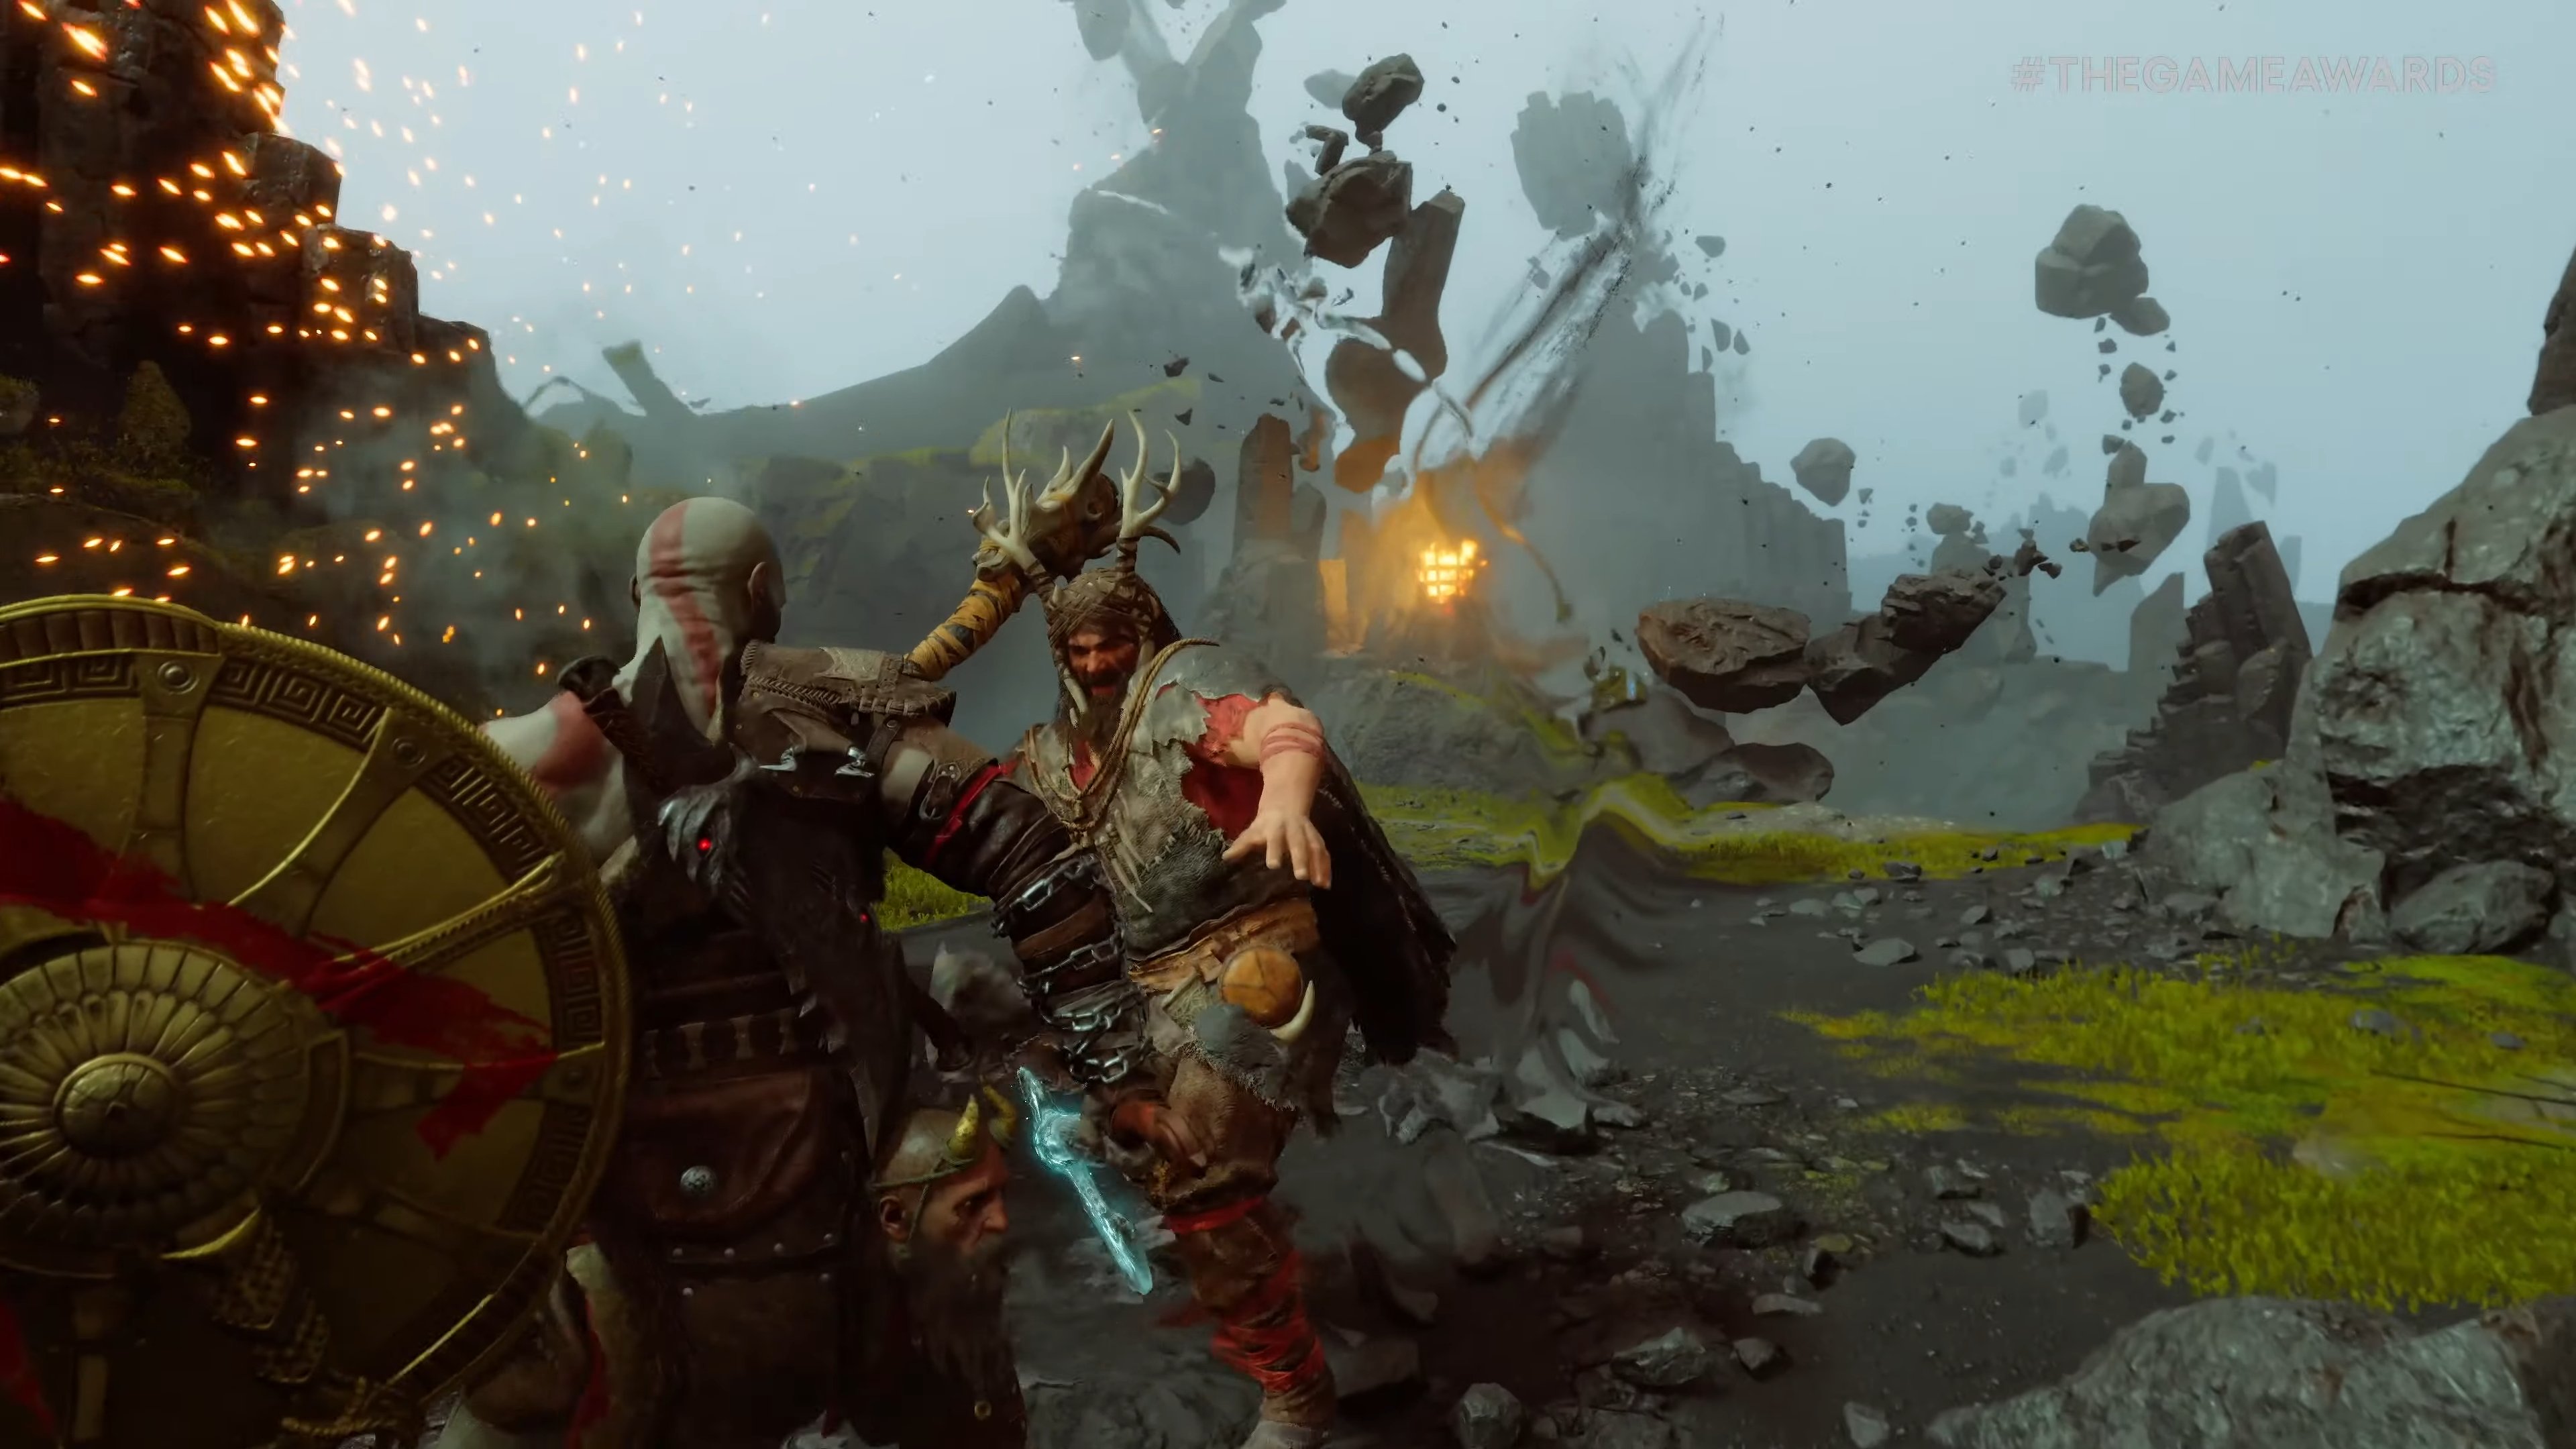 God of War Ragnarok Valhalla Is Free Roguelike DLC That Launches